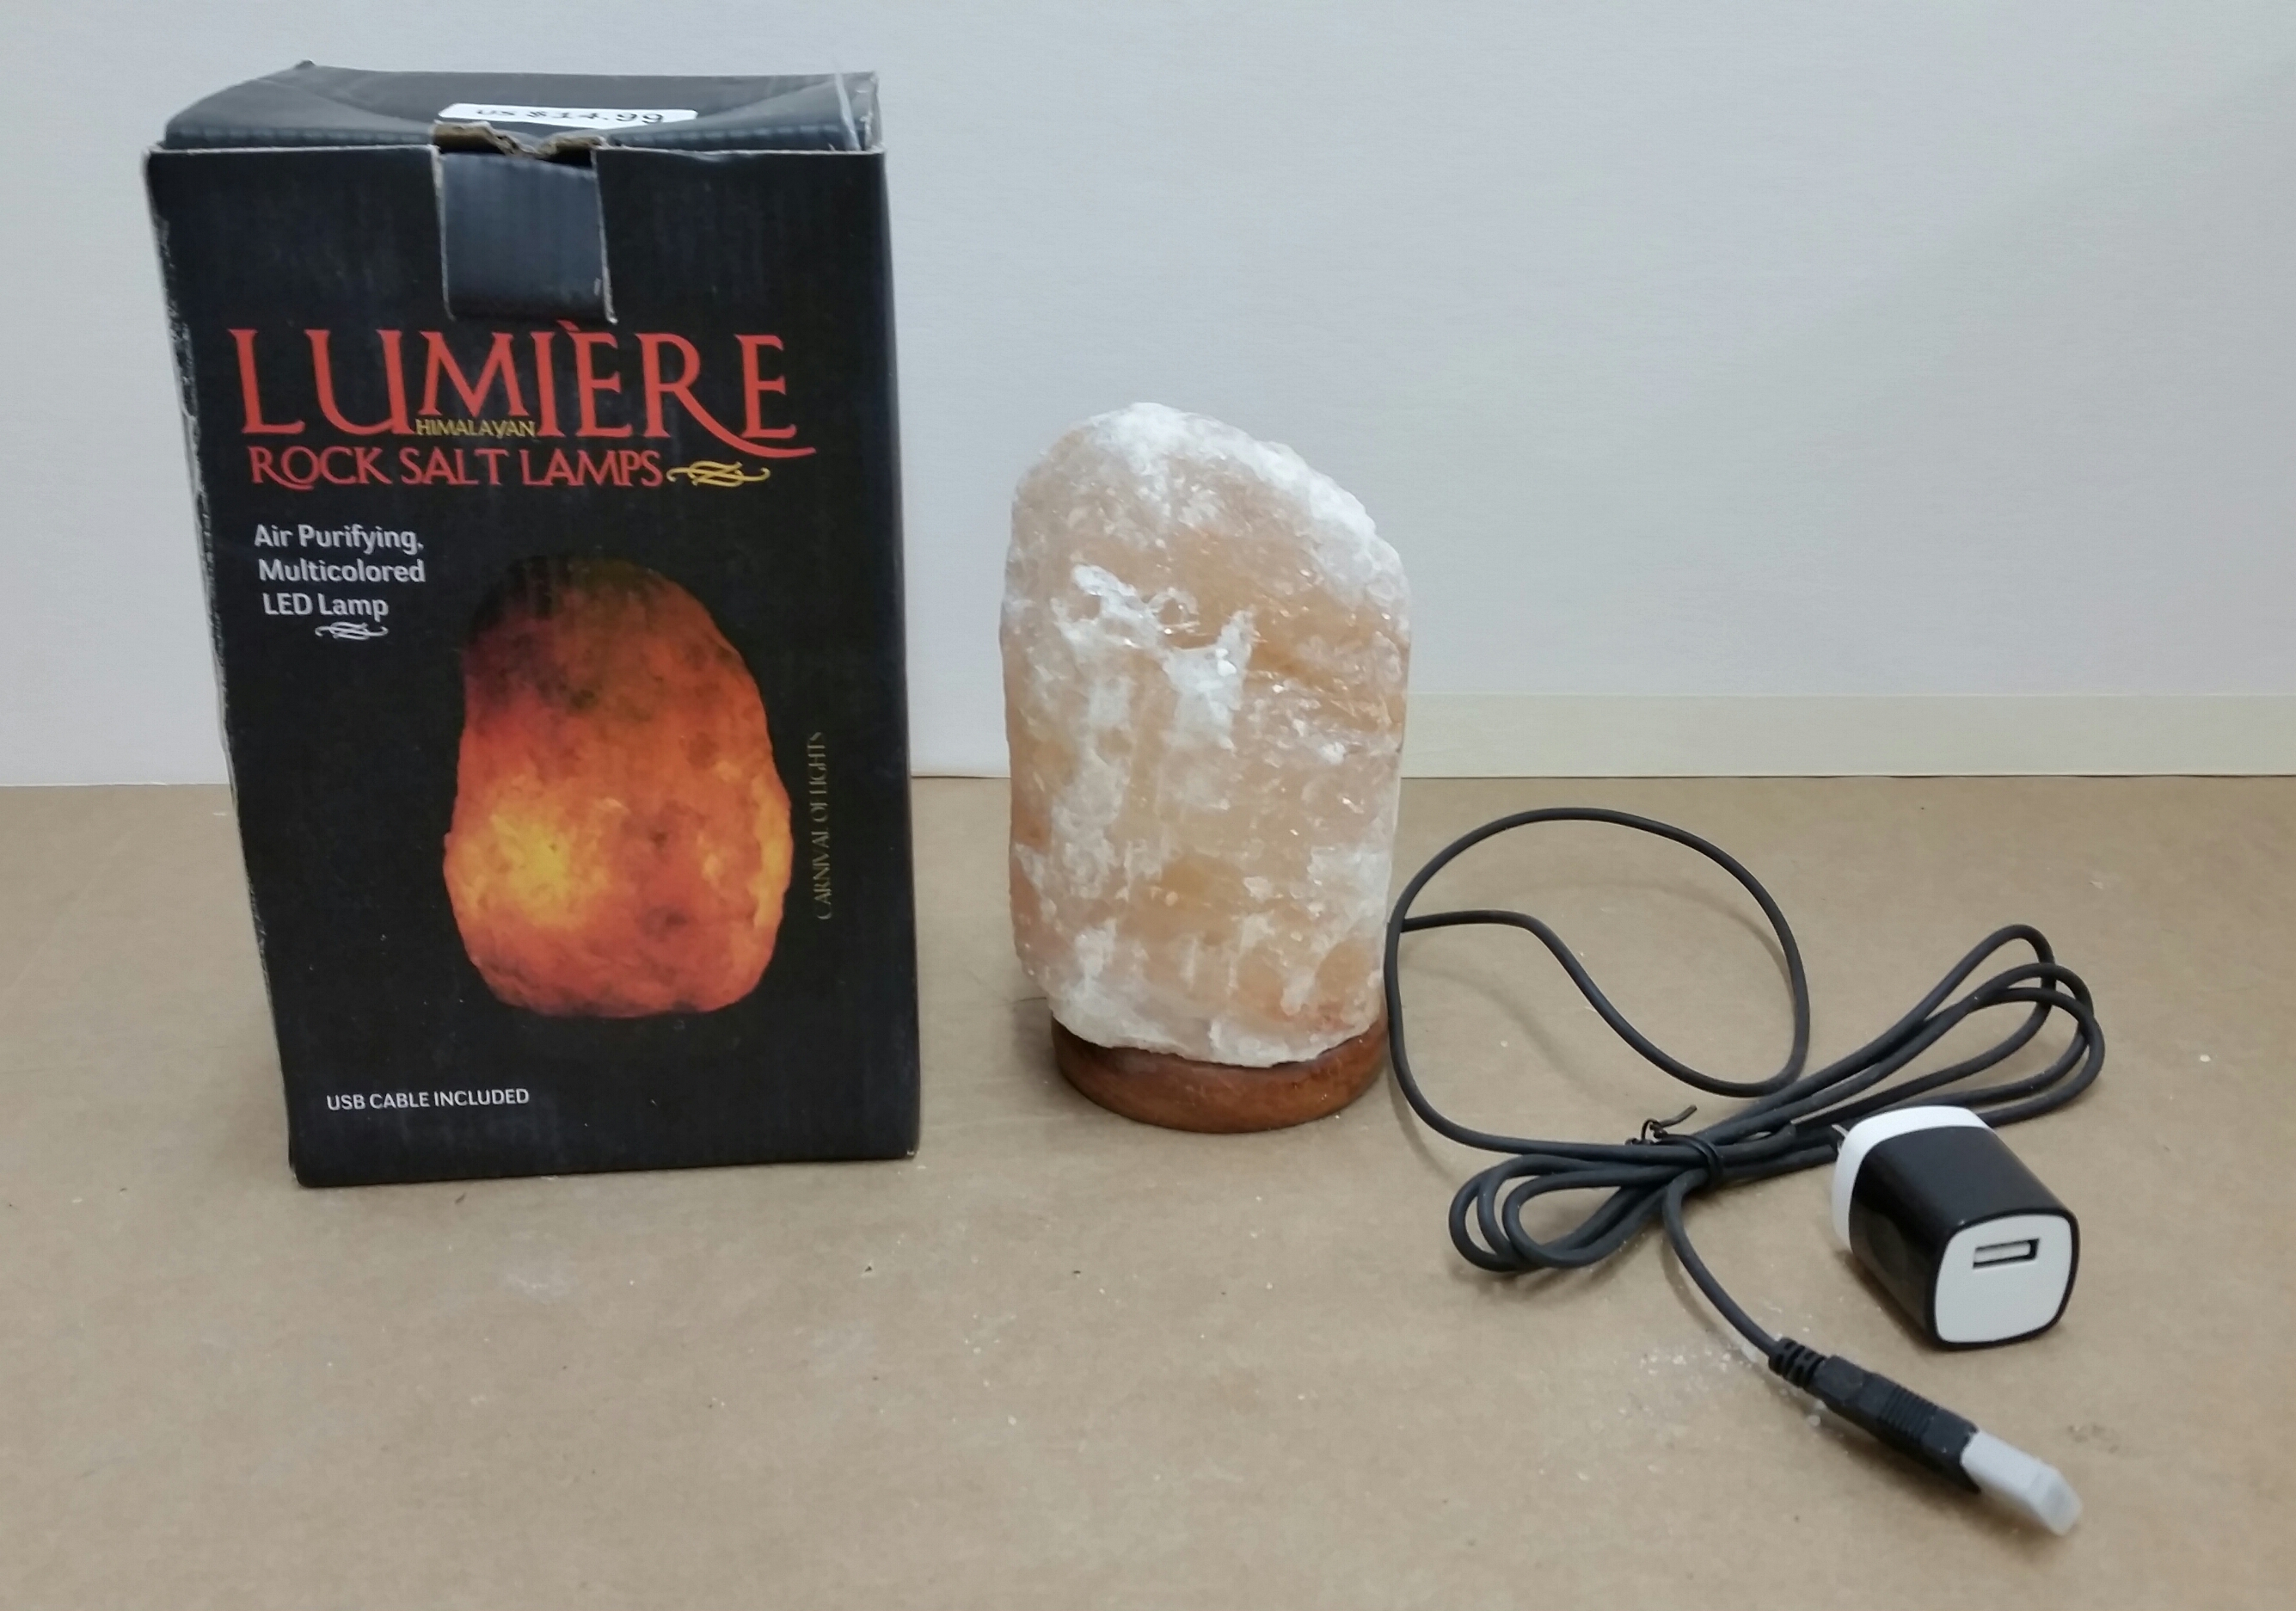 Michaels Recalls Rock Salt Lamps Due To Shock And Fire Hazards for dimensions 2670 X 1873